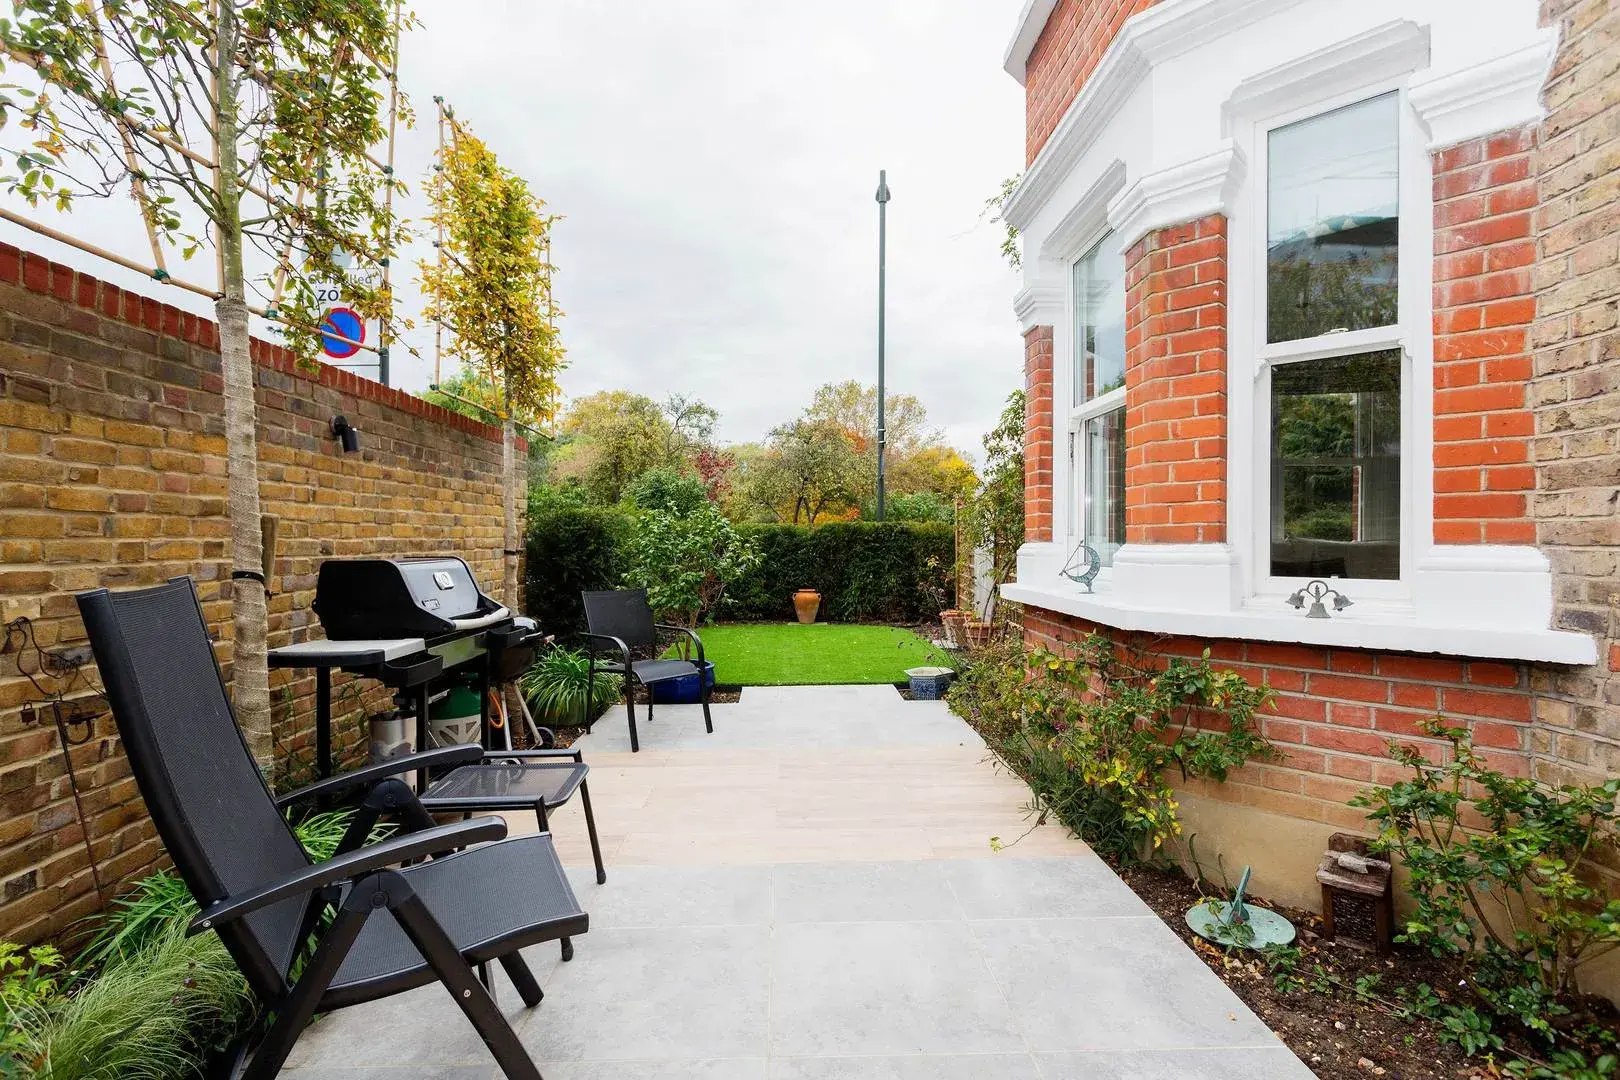 Trinity Road, holiday home in Wimbledon – South London, London